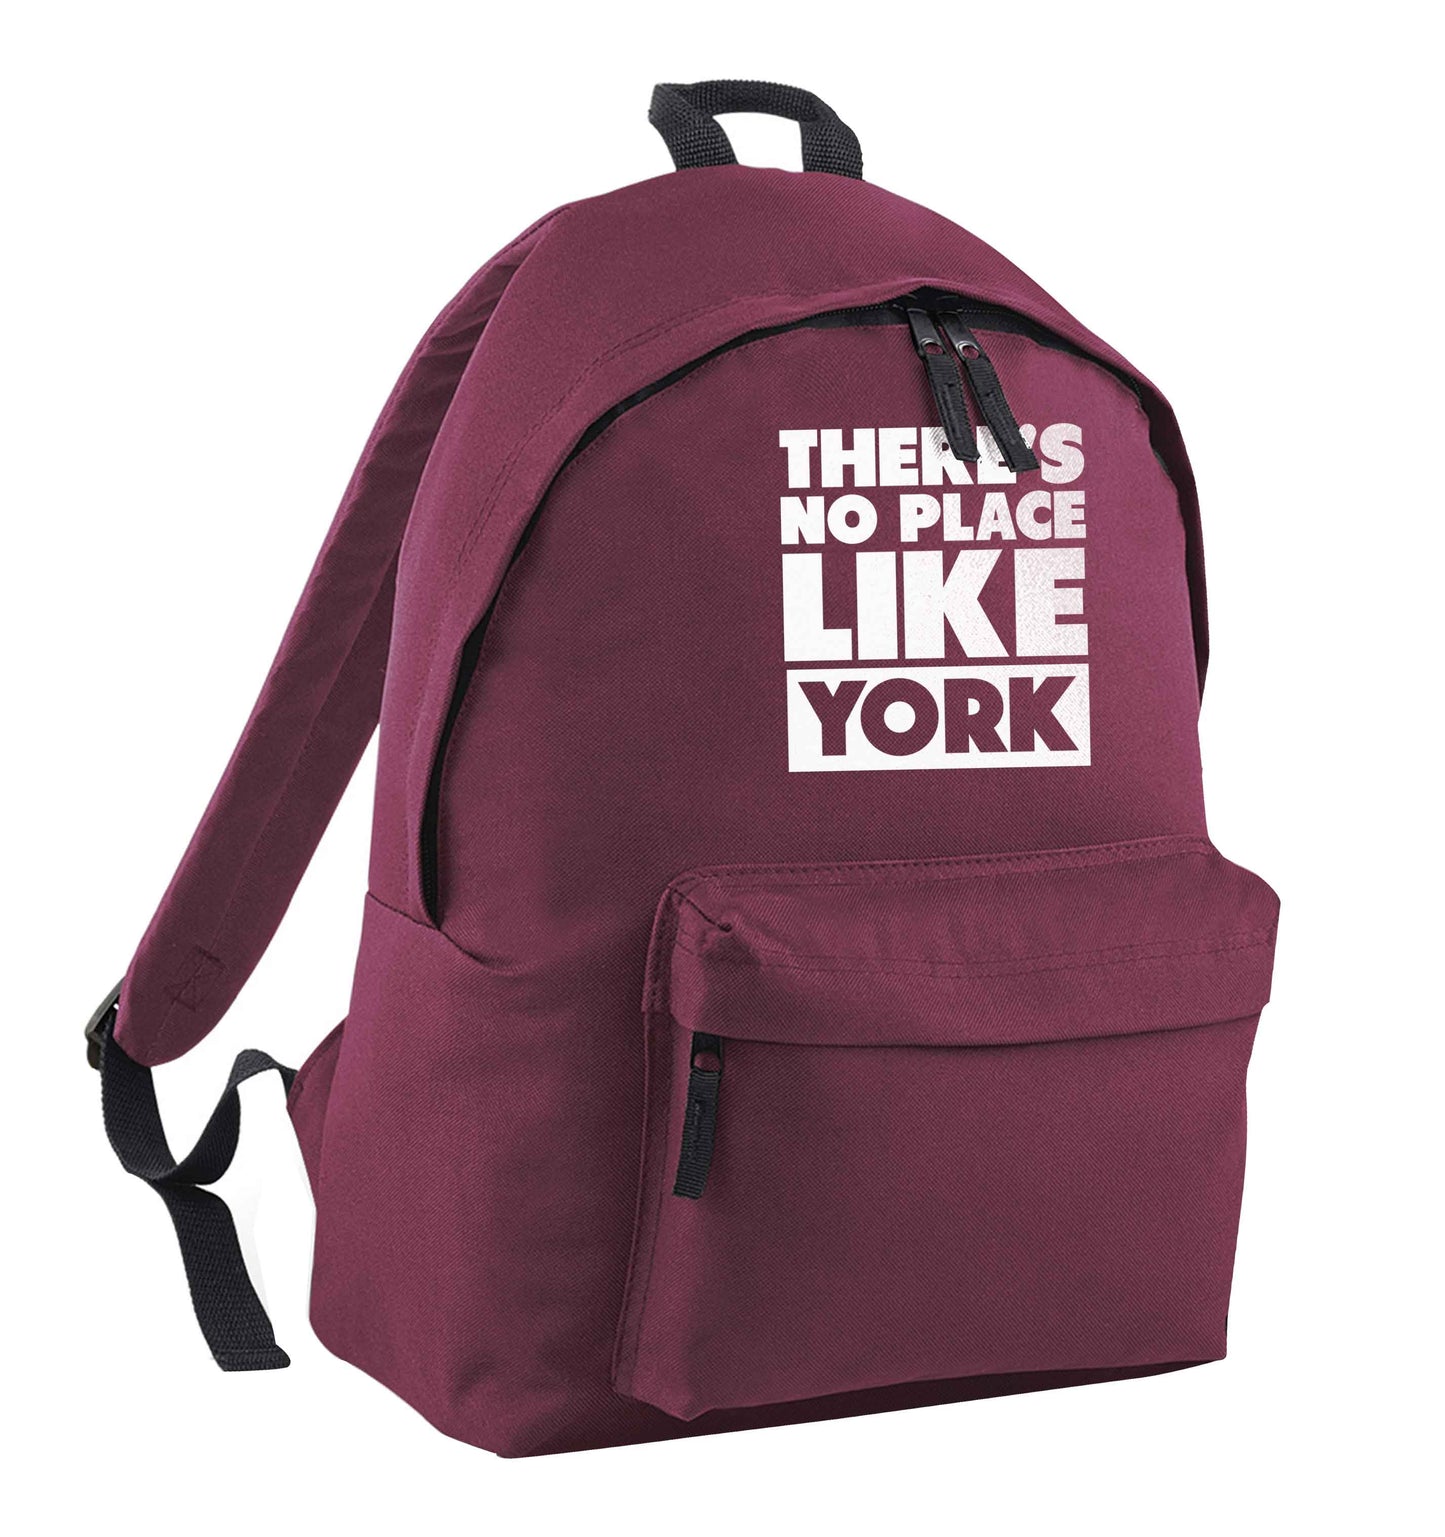 There's no place like york maroon adults backpack